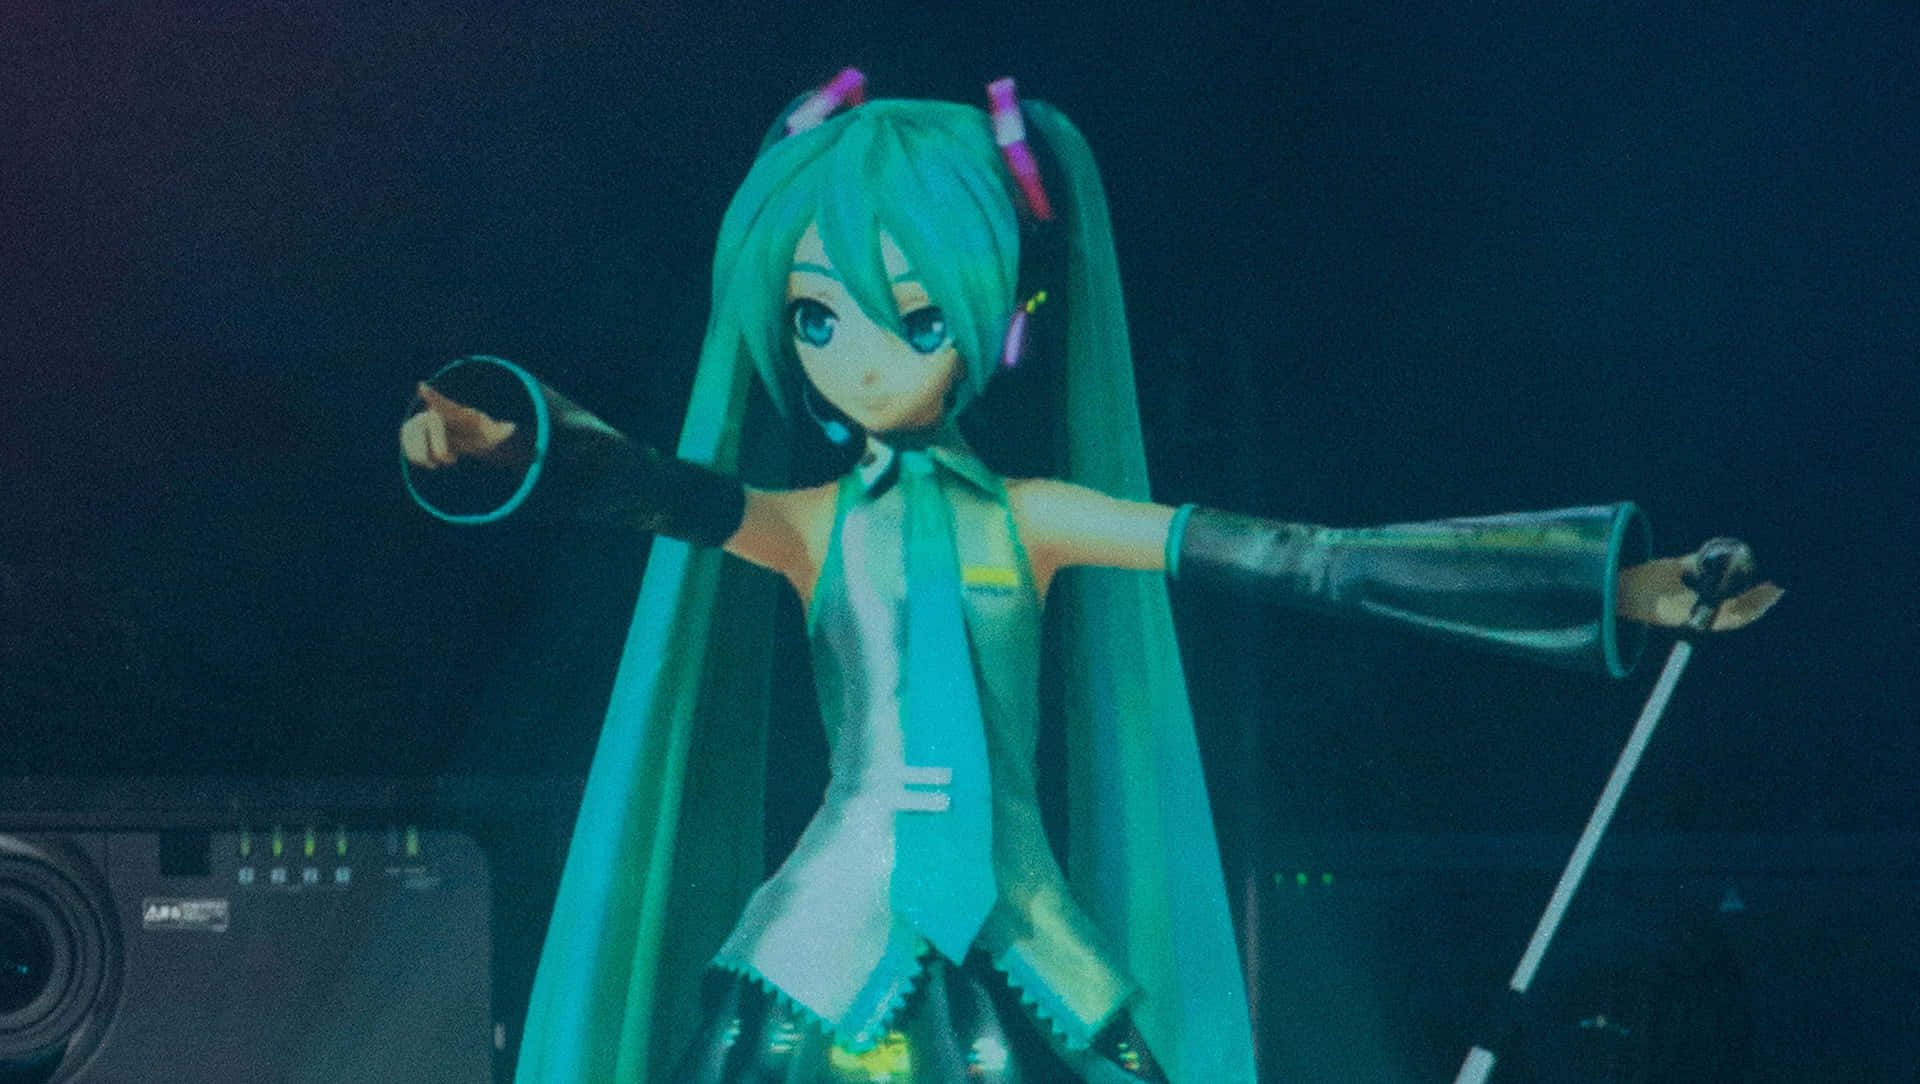 Hatsune Miku Pointing Gesture Picture